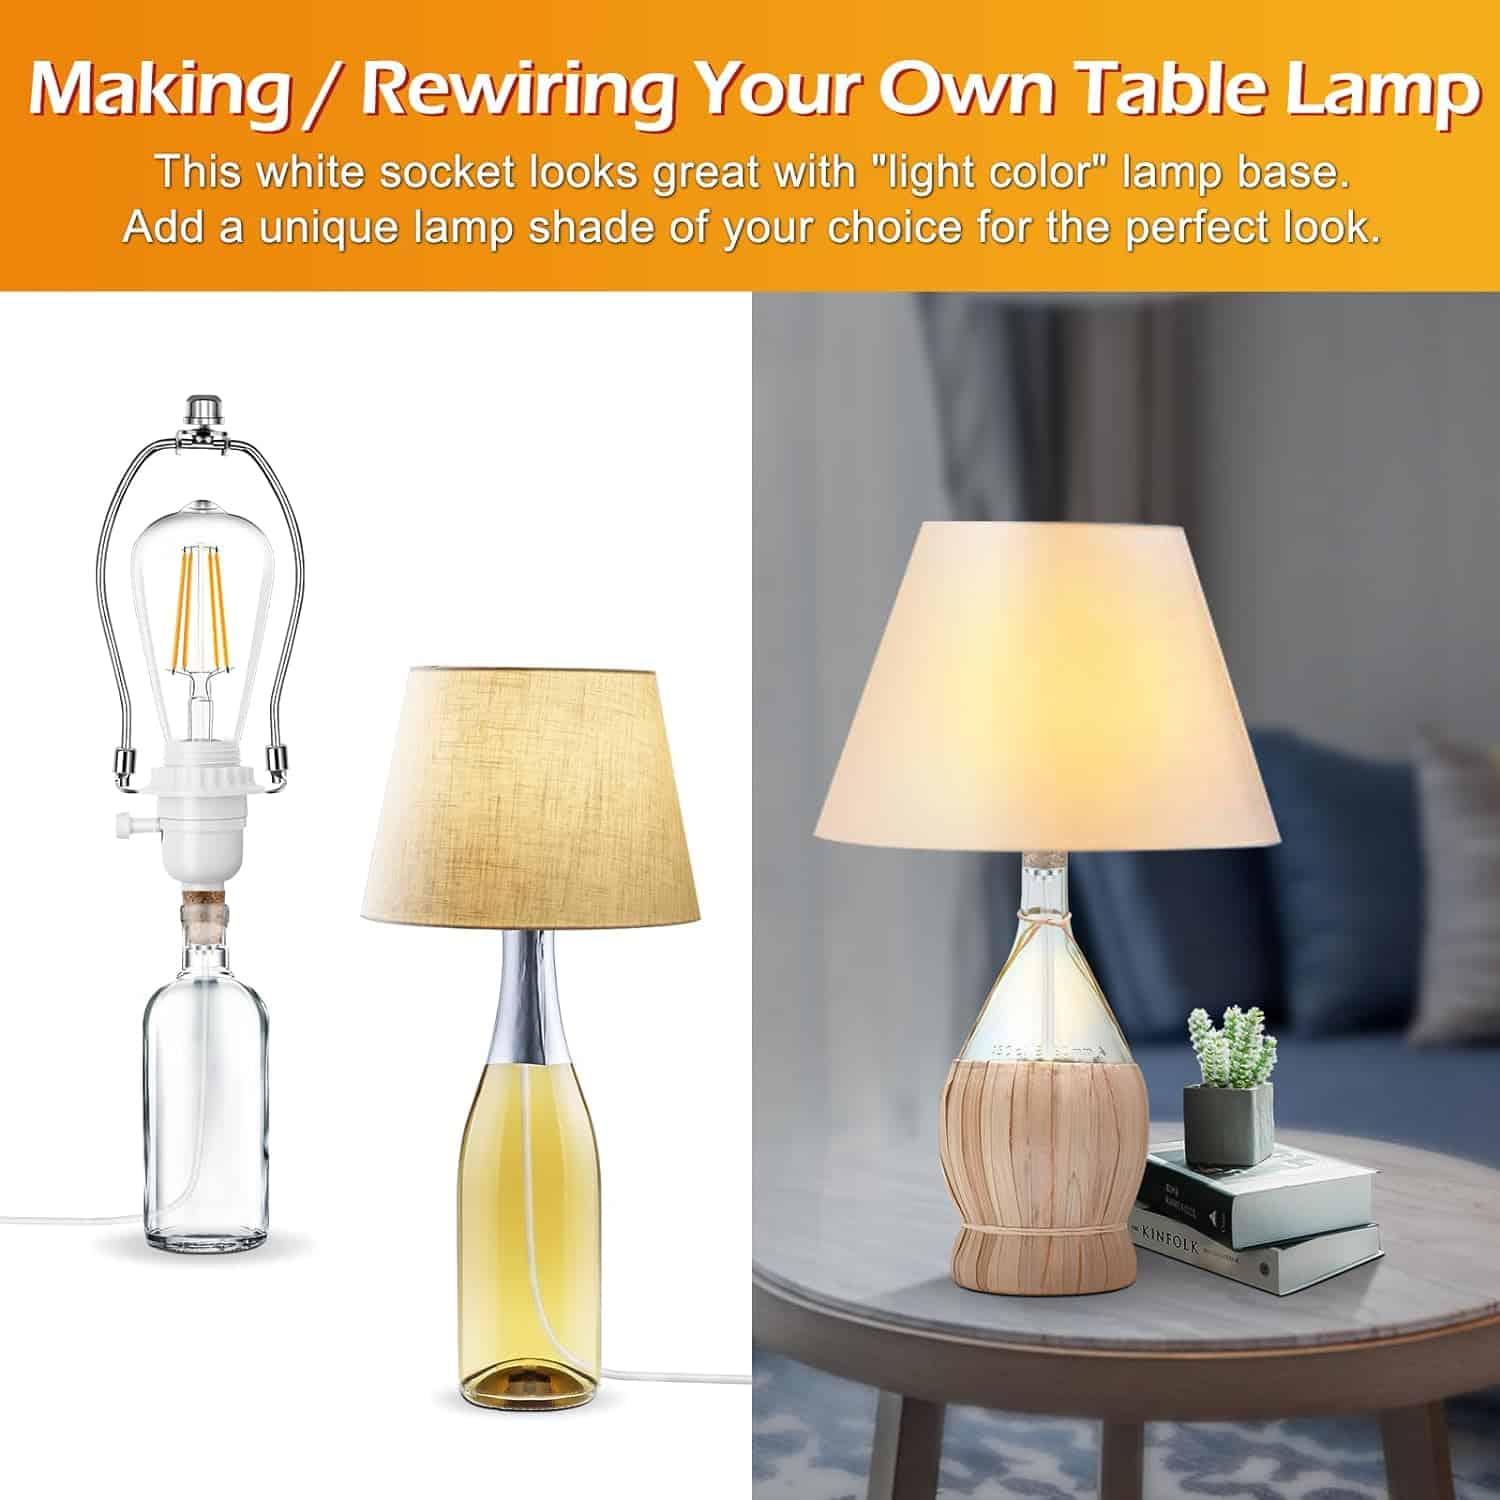 Make a Lamp or Rewire Kit,DIY Bottle Lamp Wiring Kit Includes lamp Bulb,3-Way Light Socket,Electric Cord,Glass Drill Bit,Bottle Corks etc., All Essential Hardware Set for Bottle Lamp Design or Repair